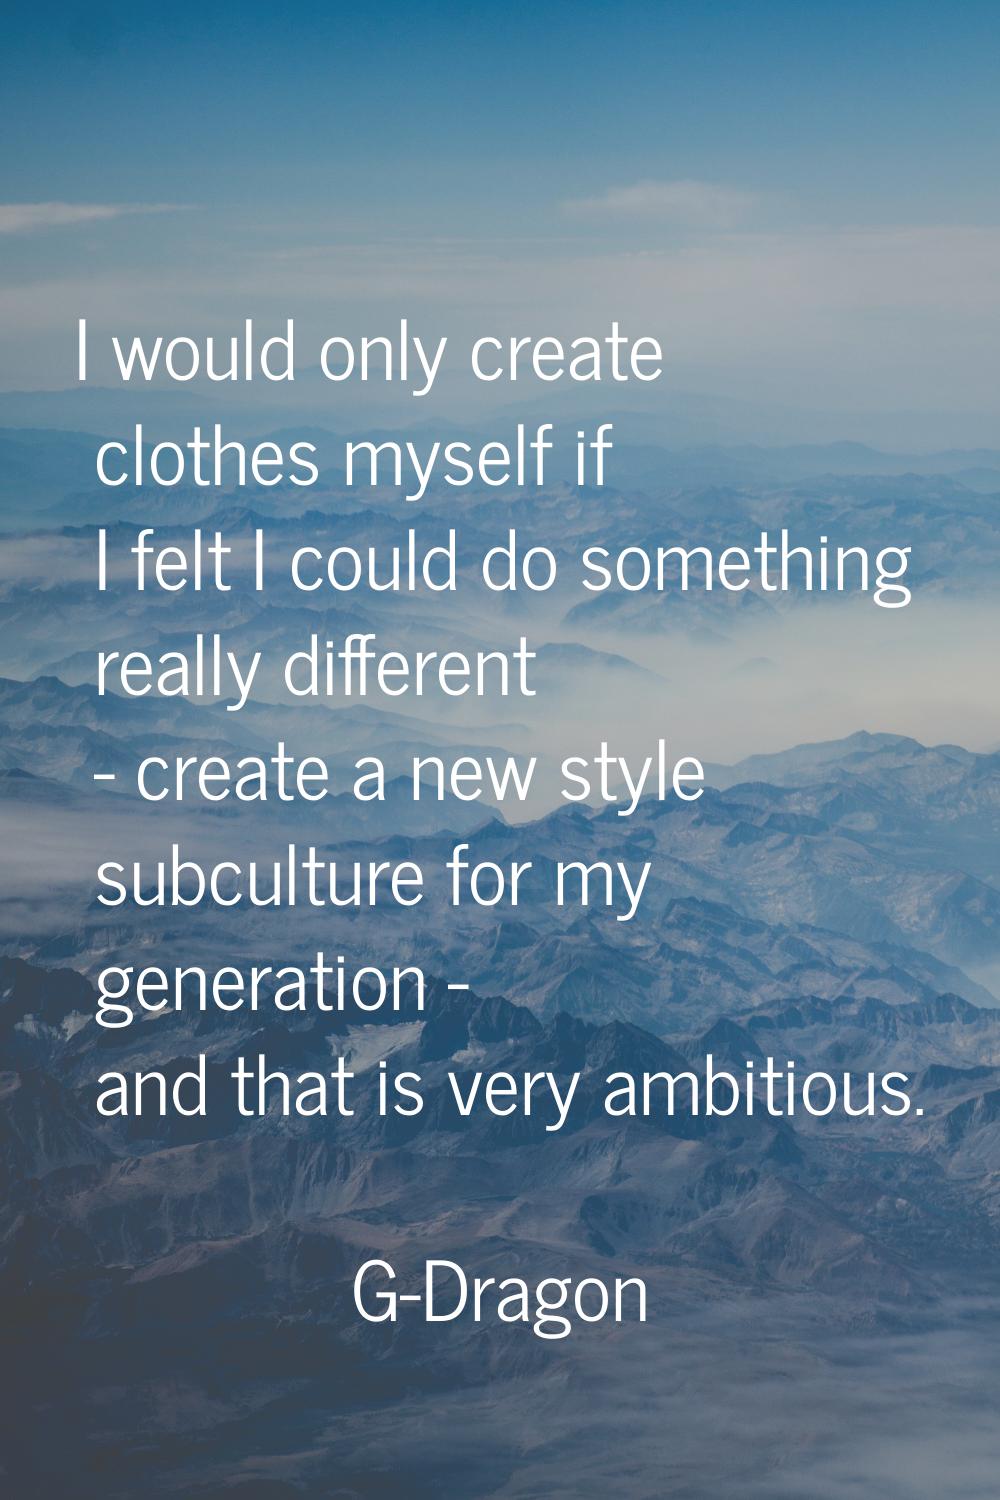 I would only create clothes myself if I felt I could do something really different - create a new s